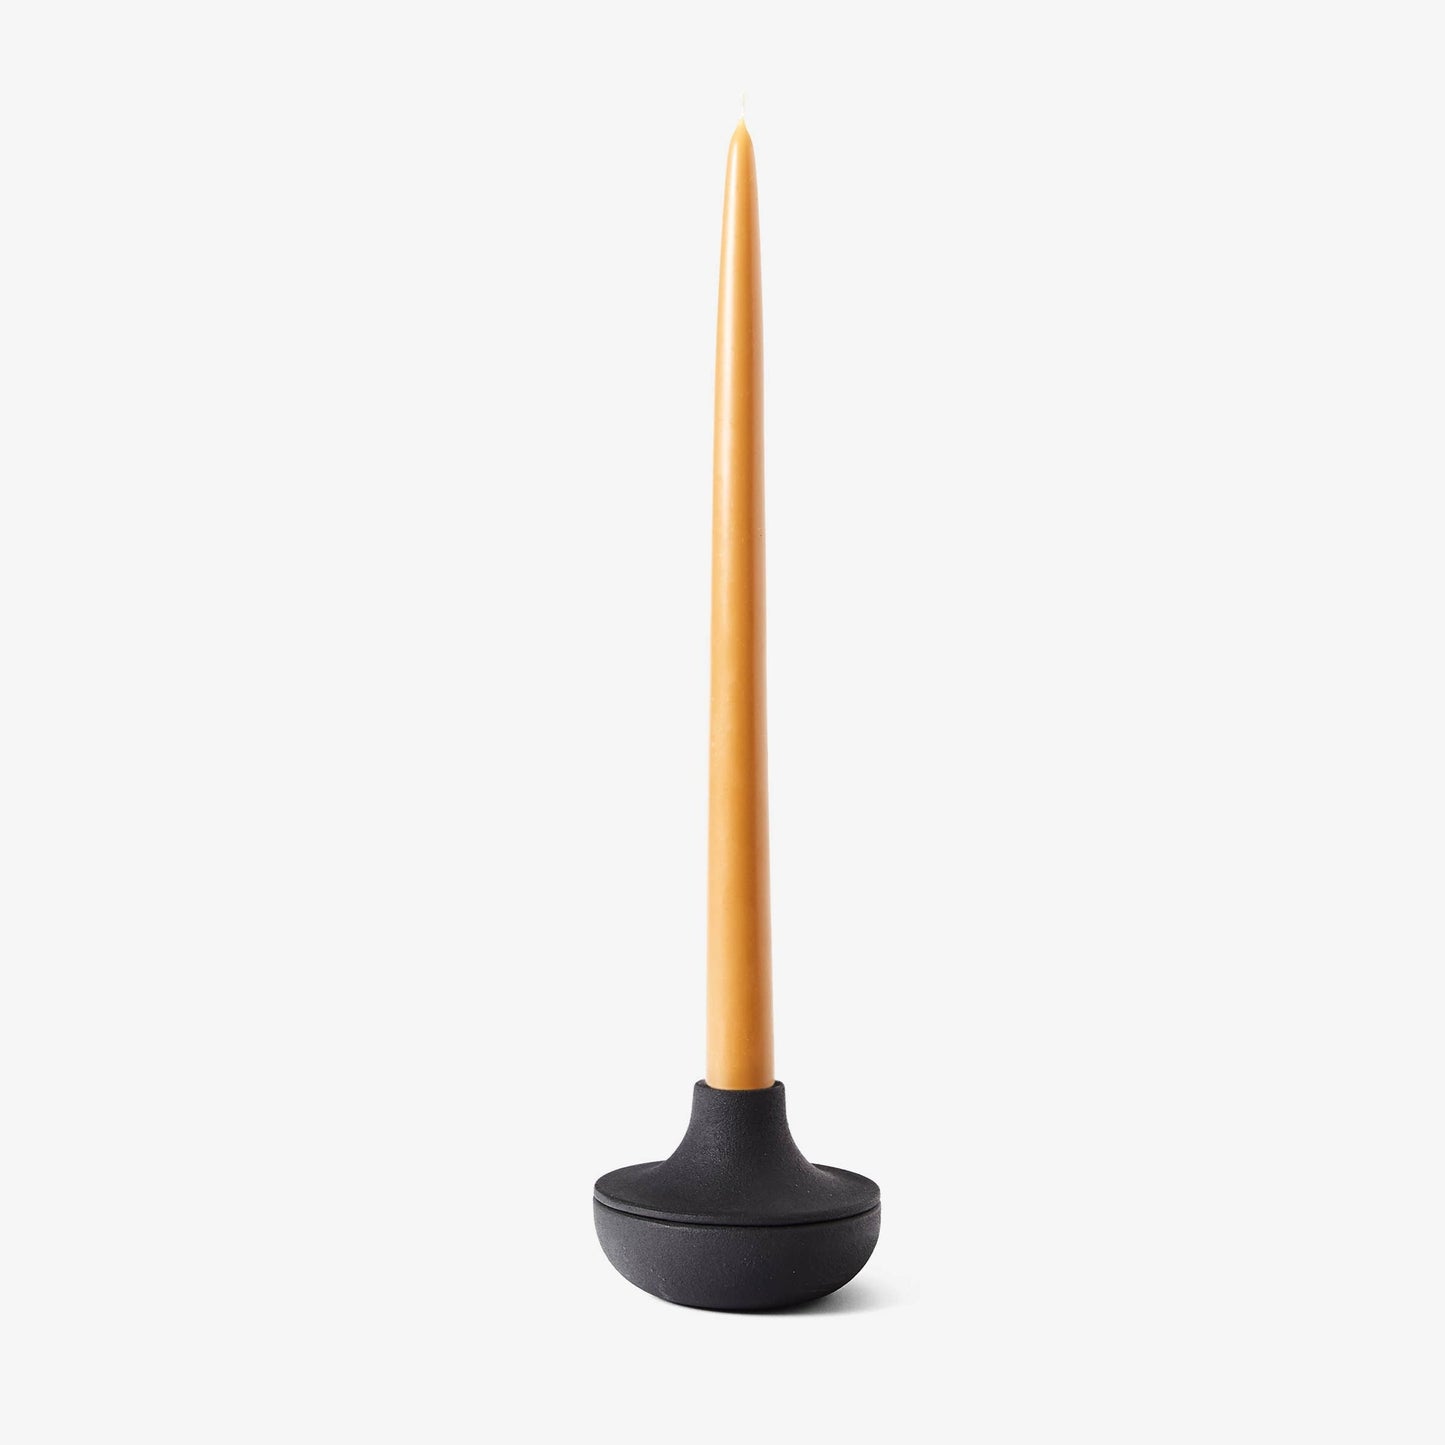 Iron Candle / Incense Holder